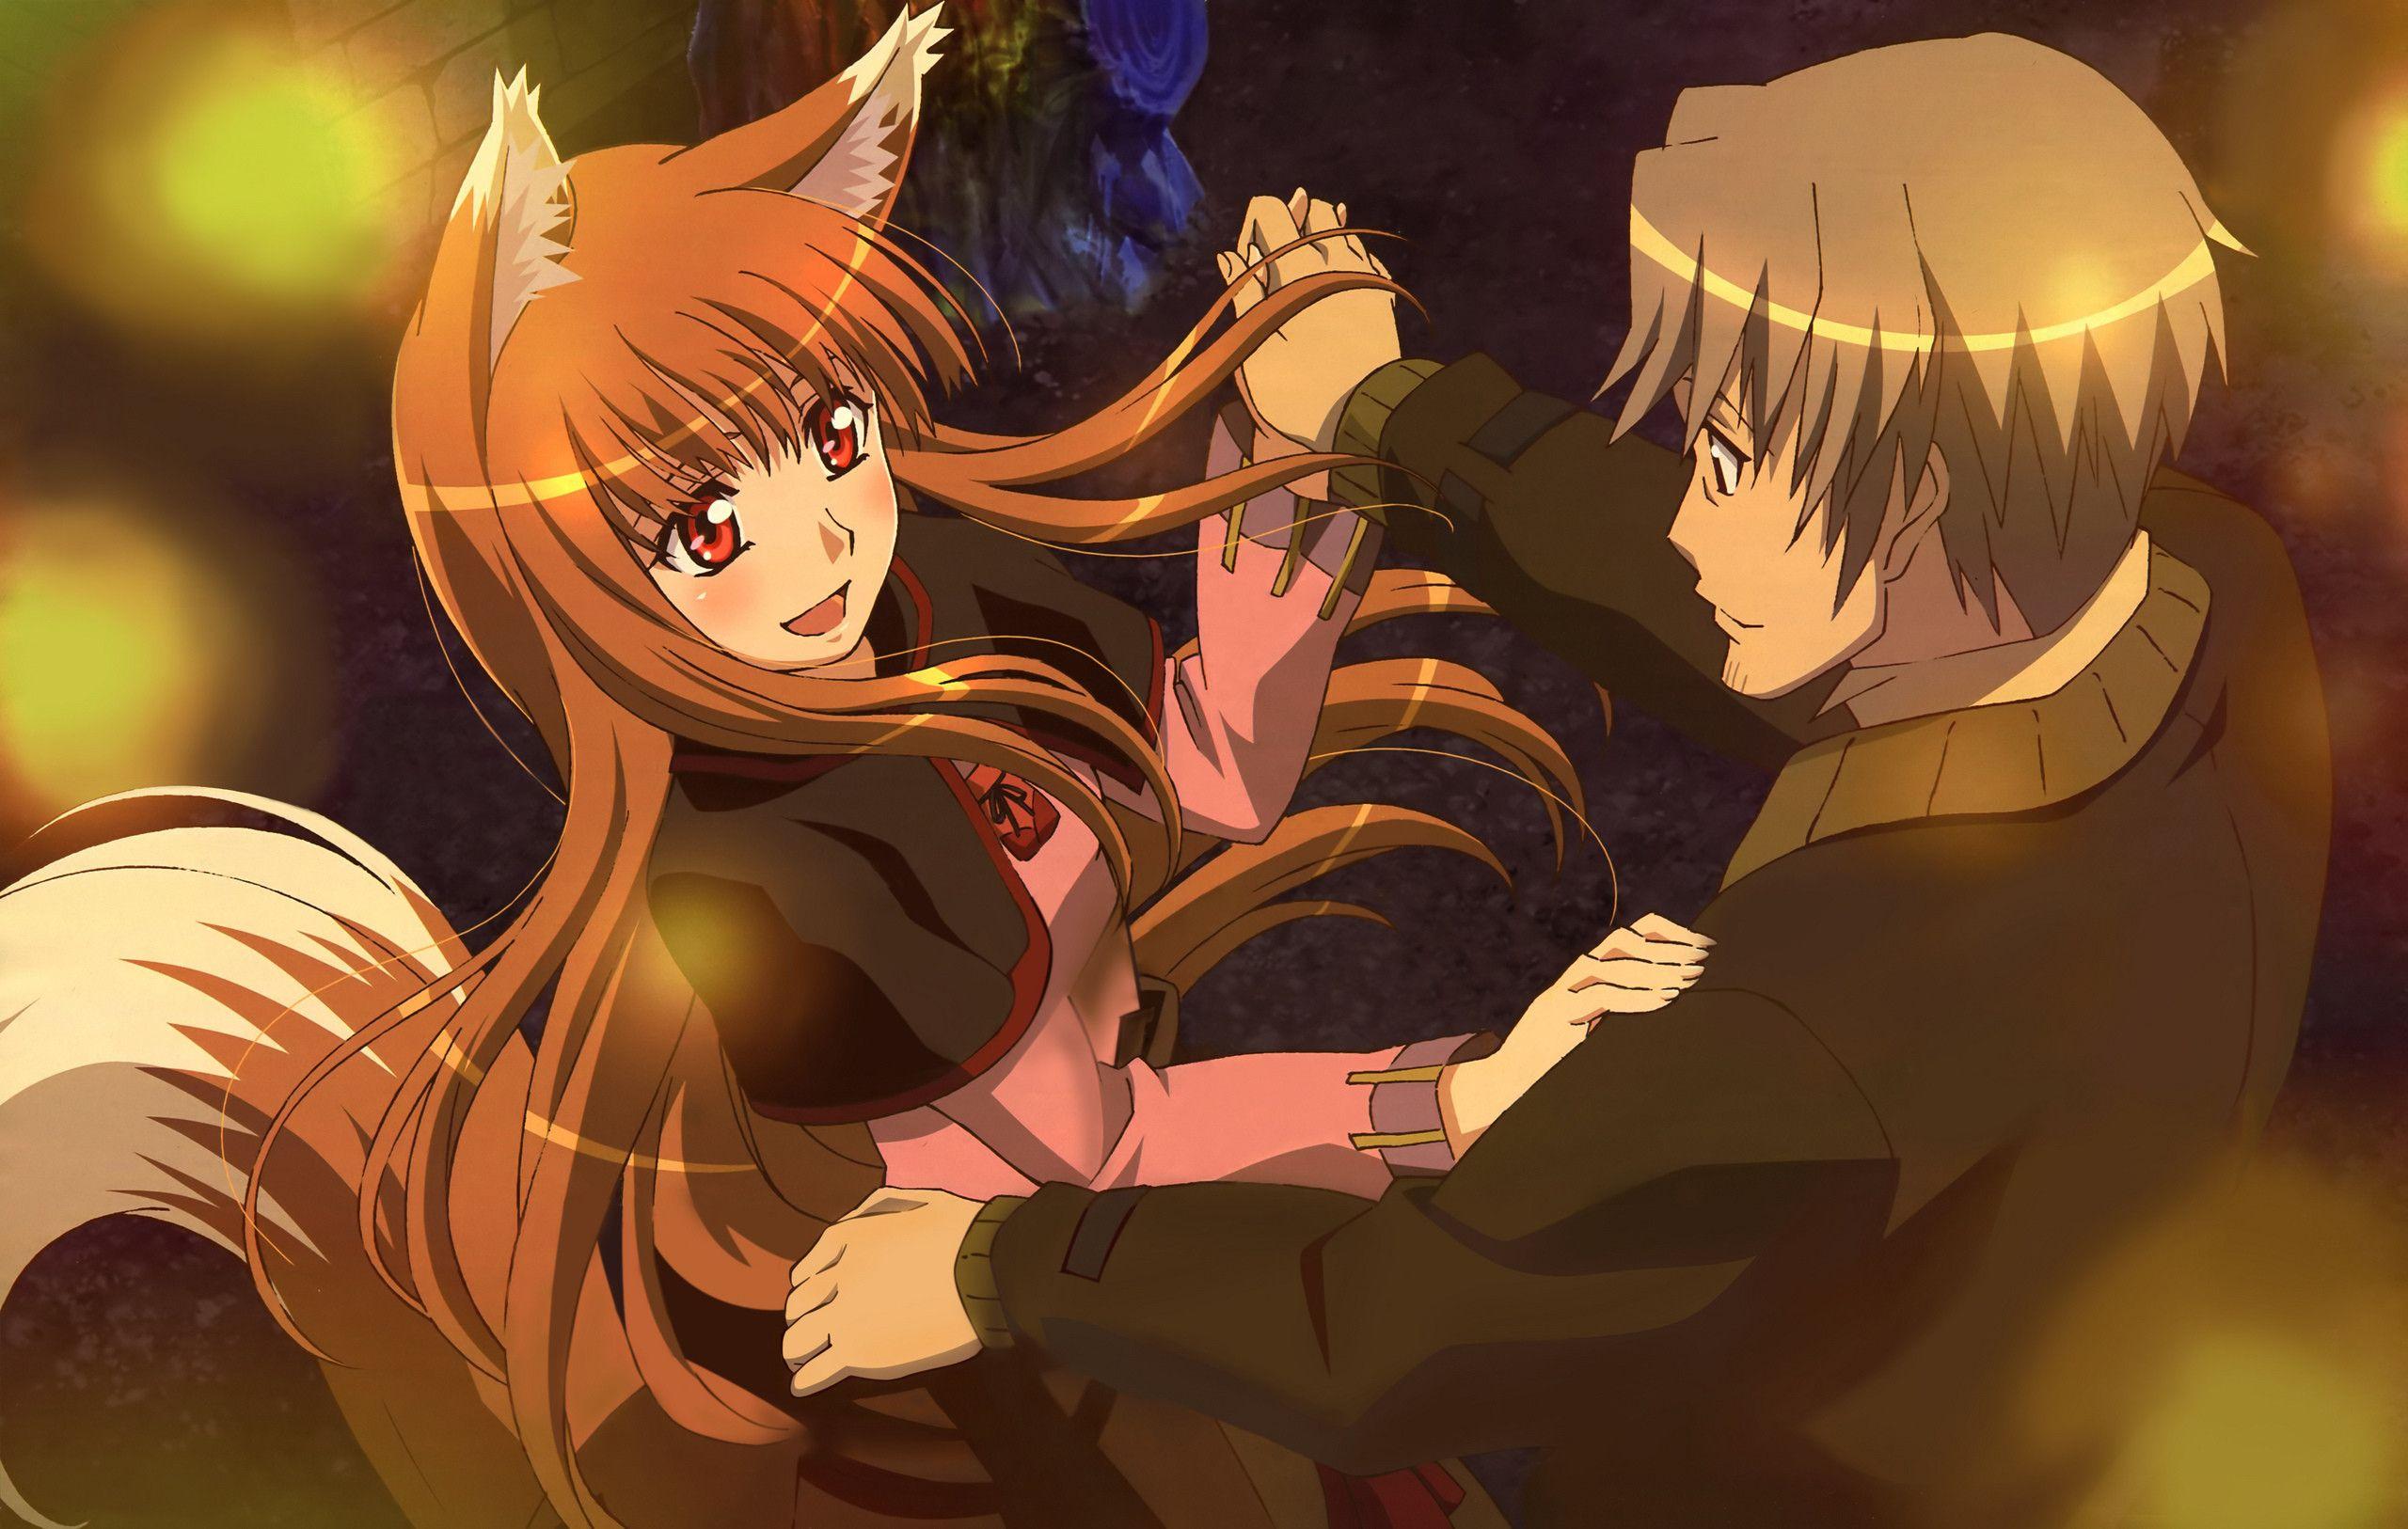 2560x1626 Spice and Wolf image Lawrence and holo Dance 2ainst HD hình nền and background các bức ảnh